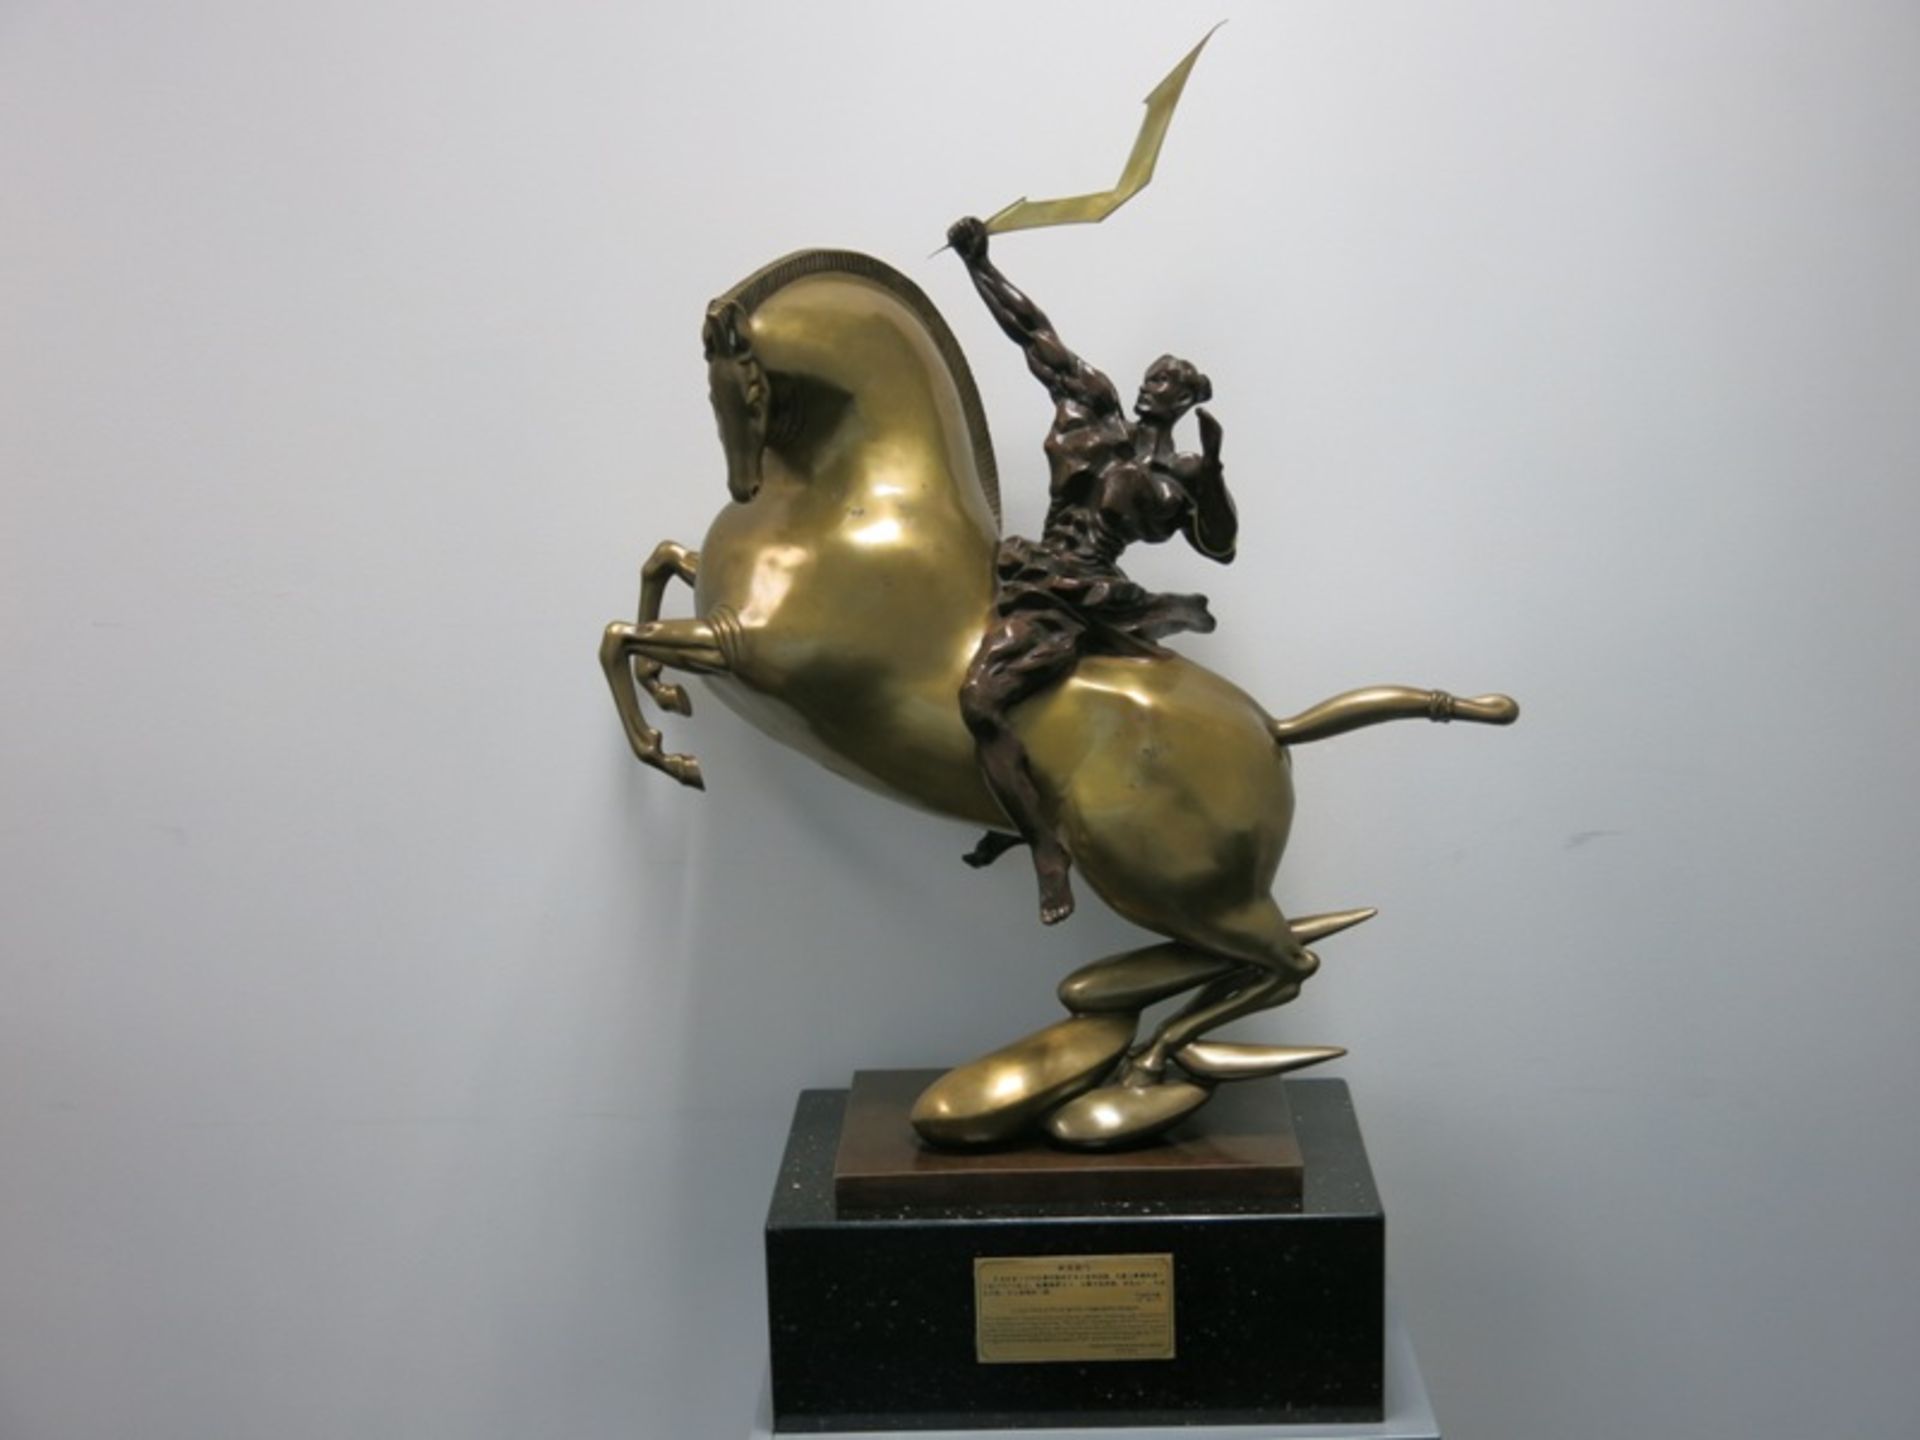 Large Bronze Sculpture on Marble Base of a Soldier Holding the Vertu Logo. Called "A Golden Spear